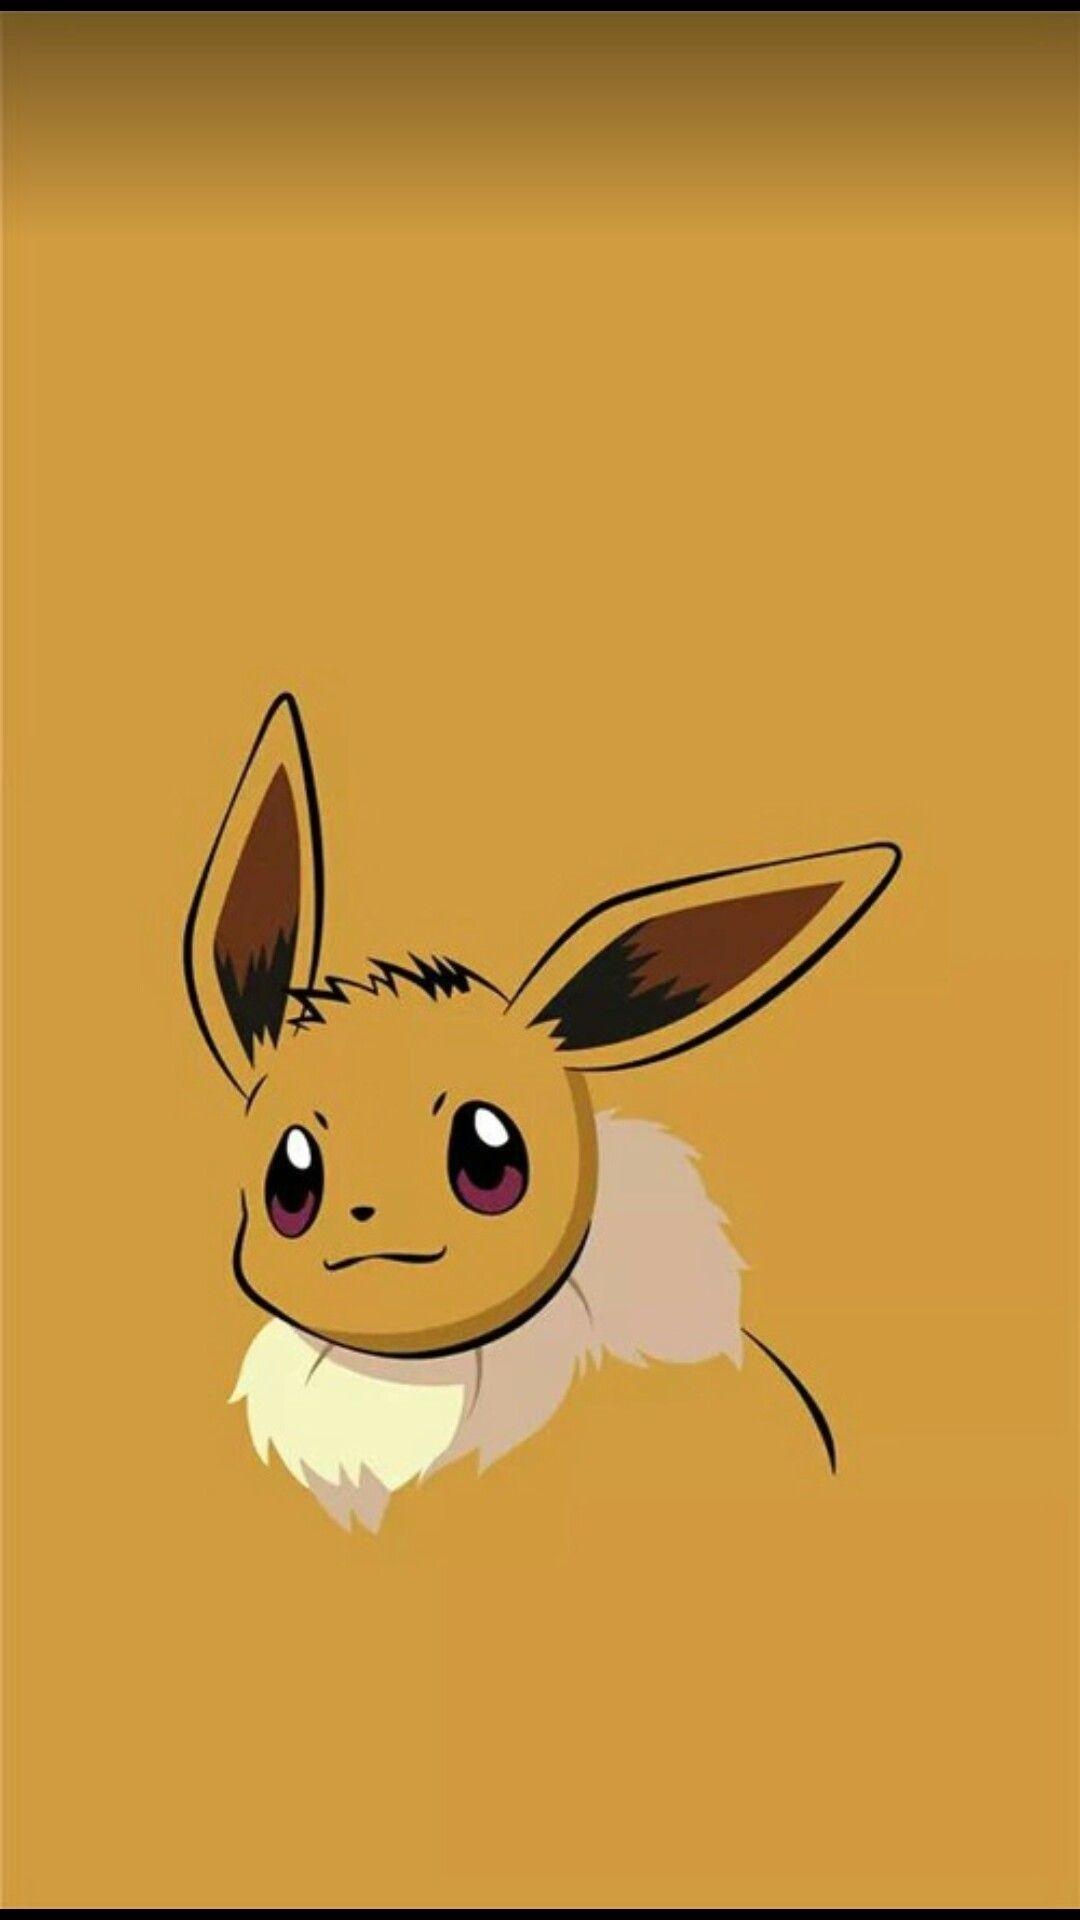 Eevee wallpaper by Lovelynature27  Download on ZEDGE  a05a